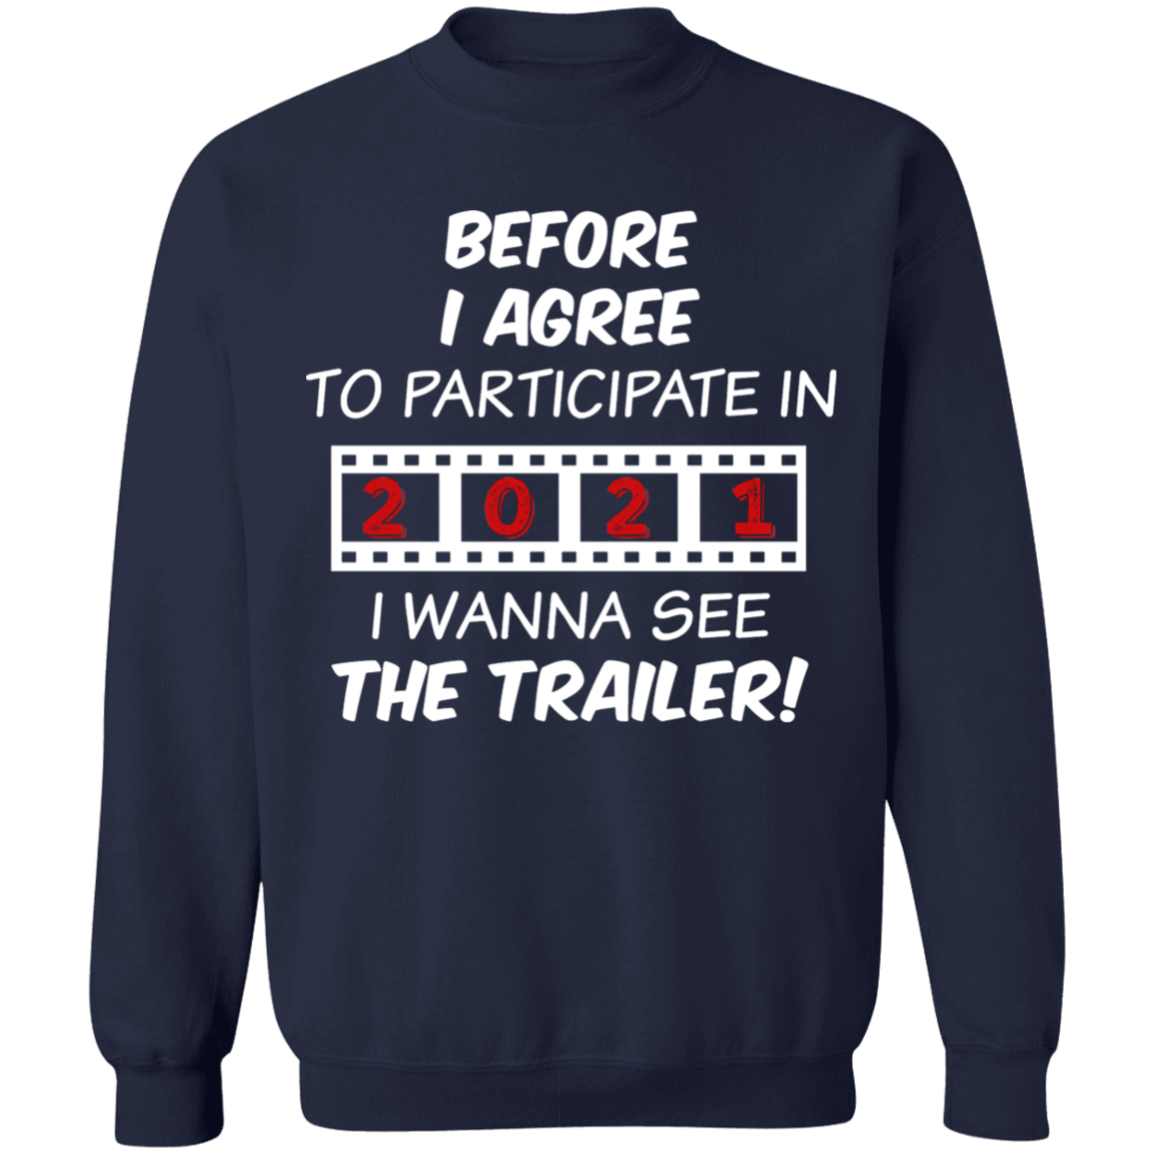 Before I Agree to Participate Sweatshirt